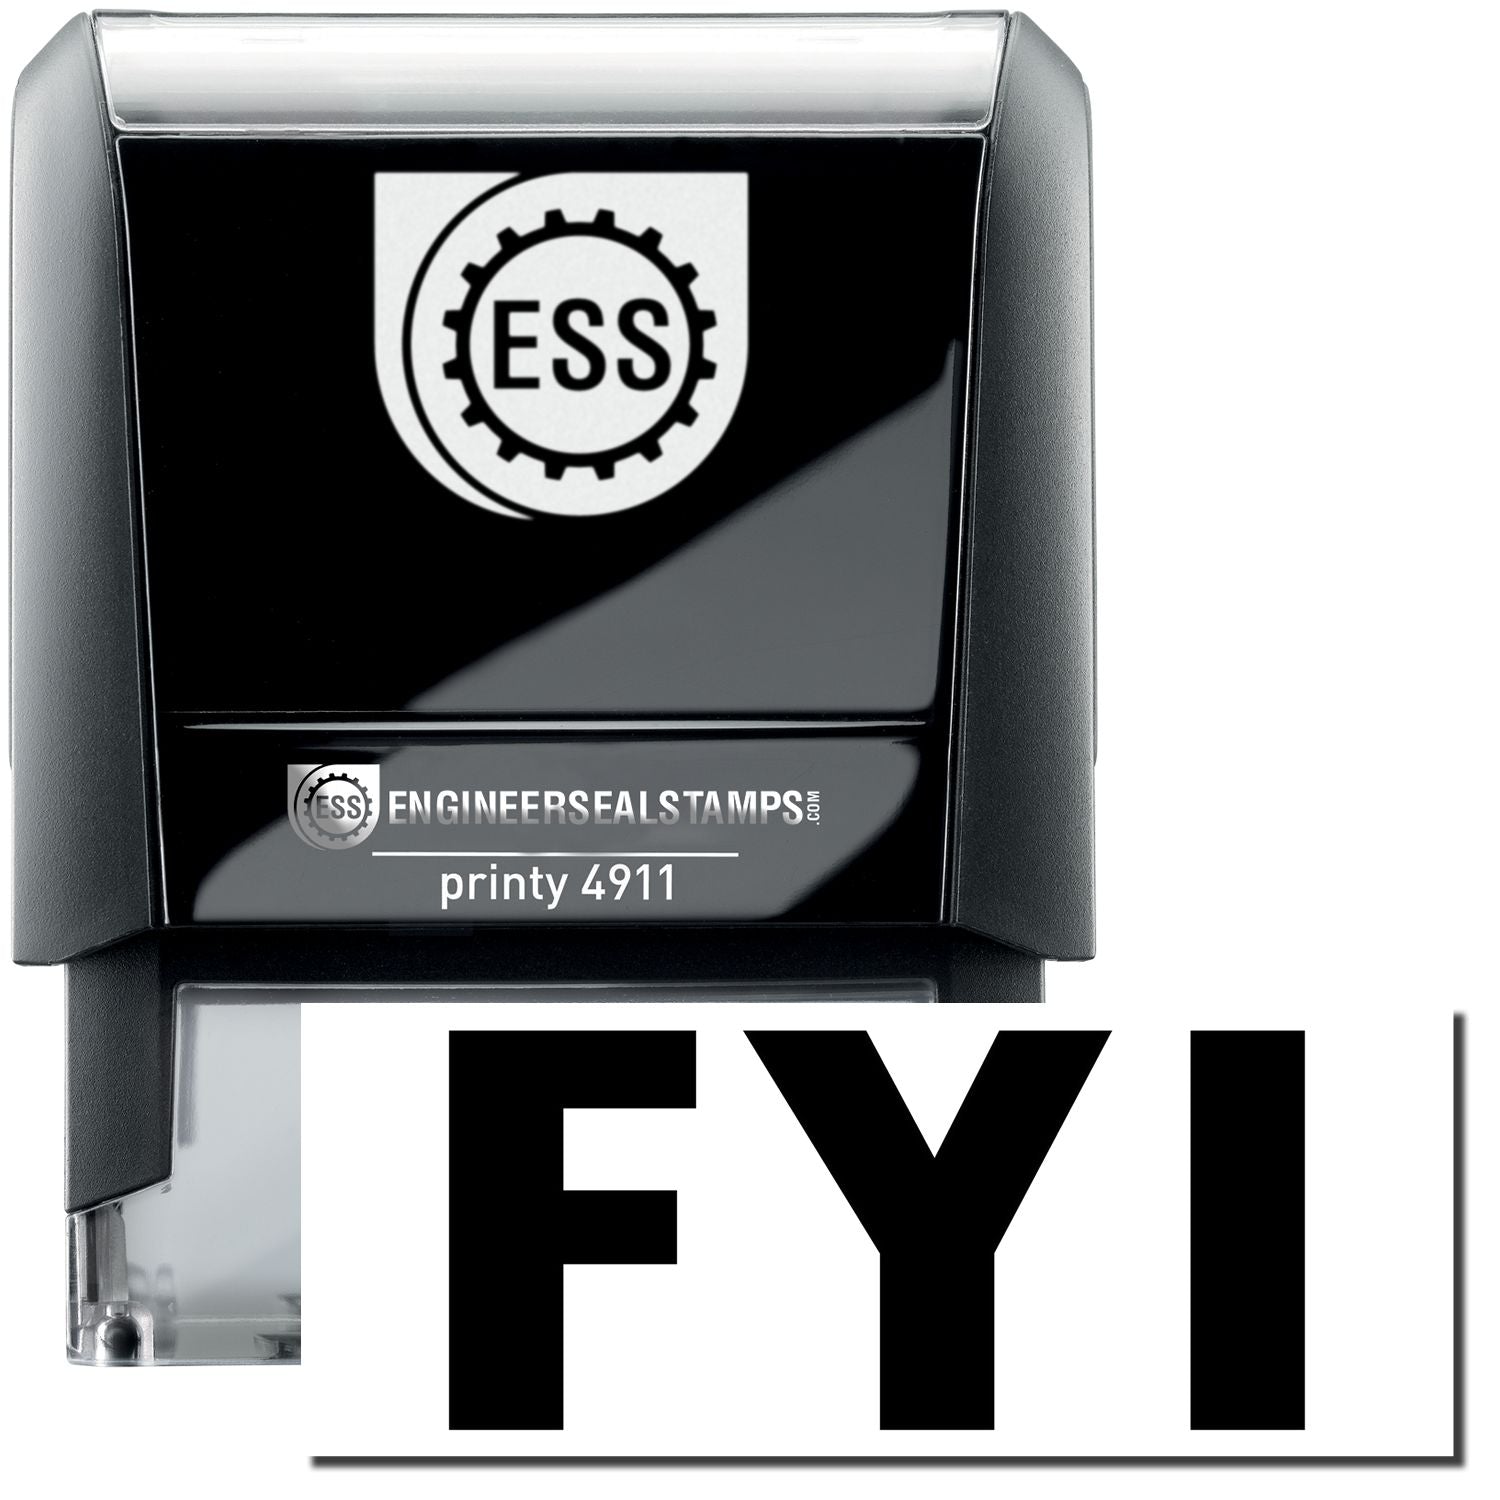 A self-inking stamp with a stamped image showing how the text "FYI" is displayed after stamping.